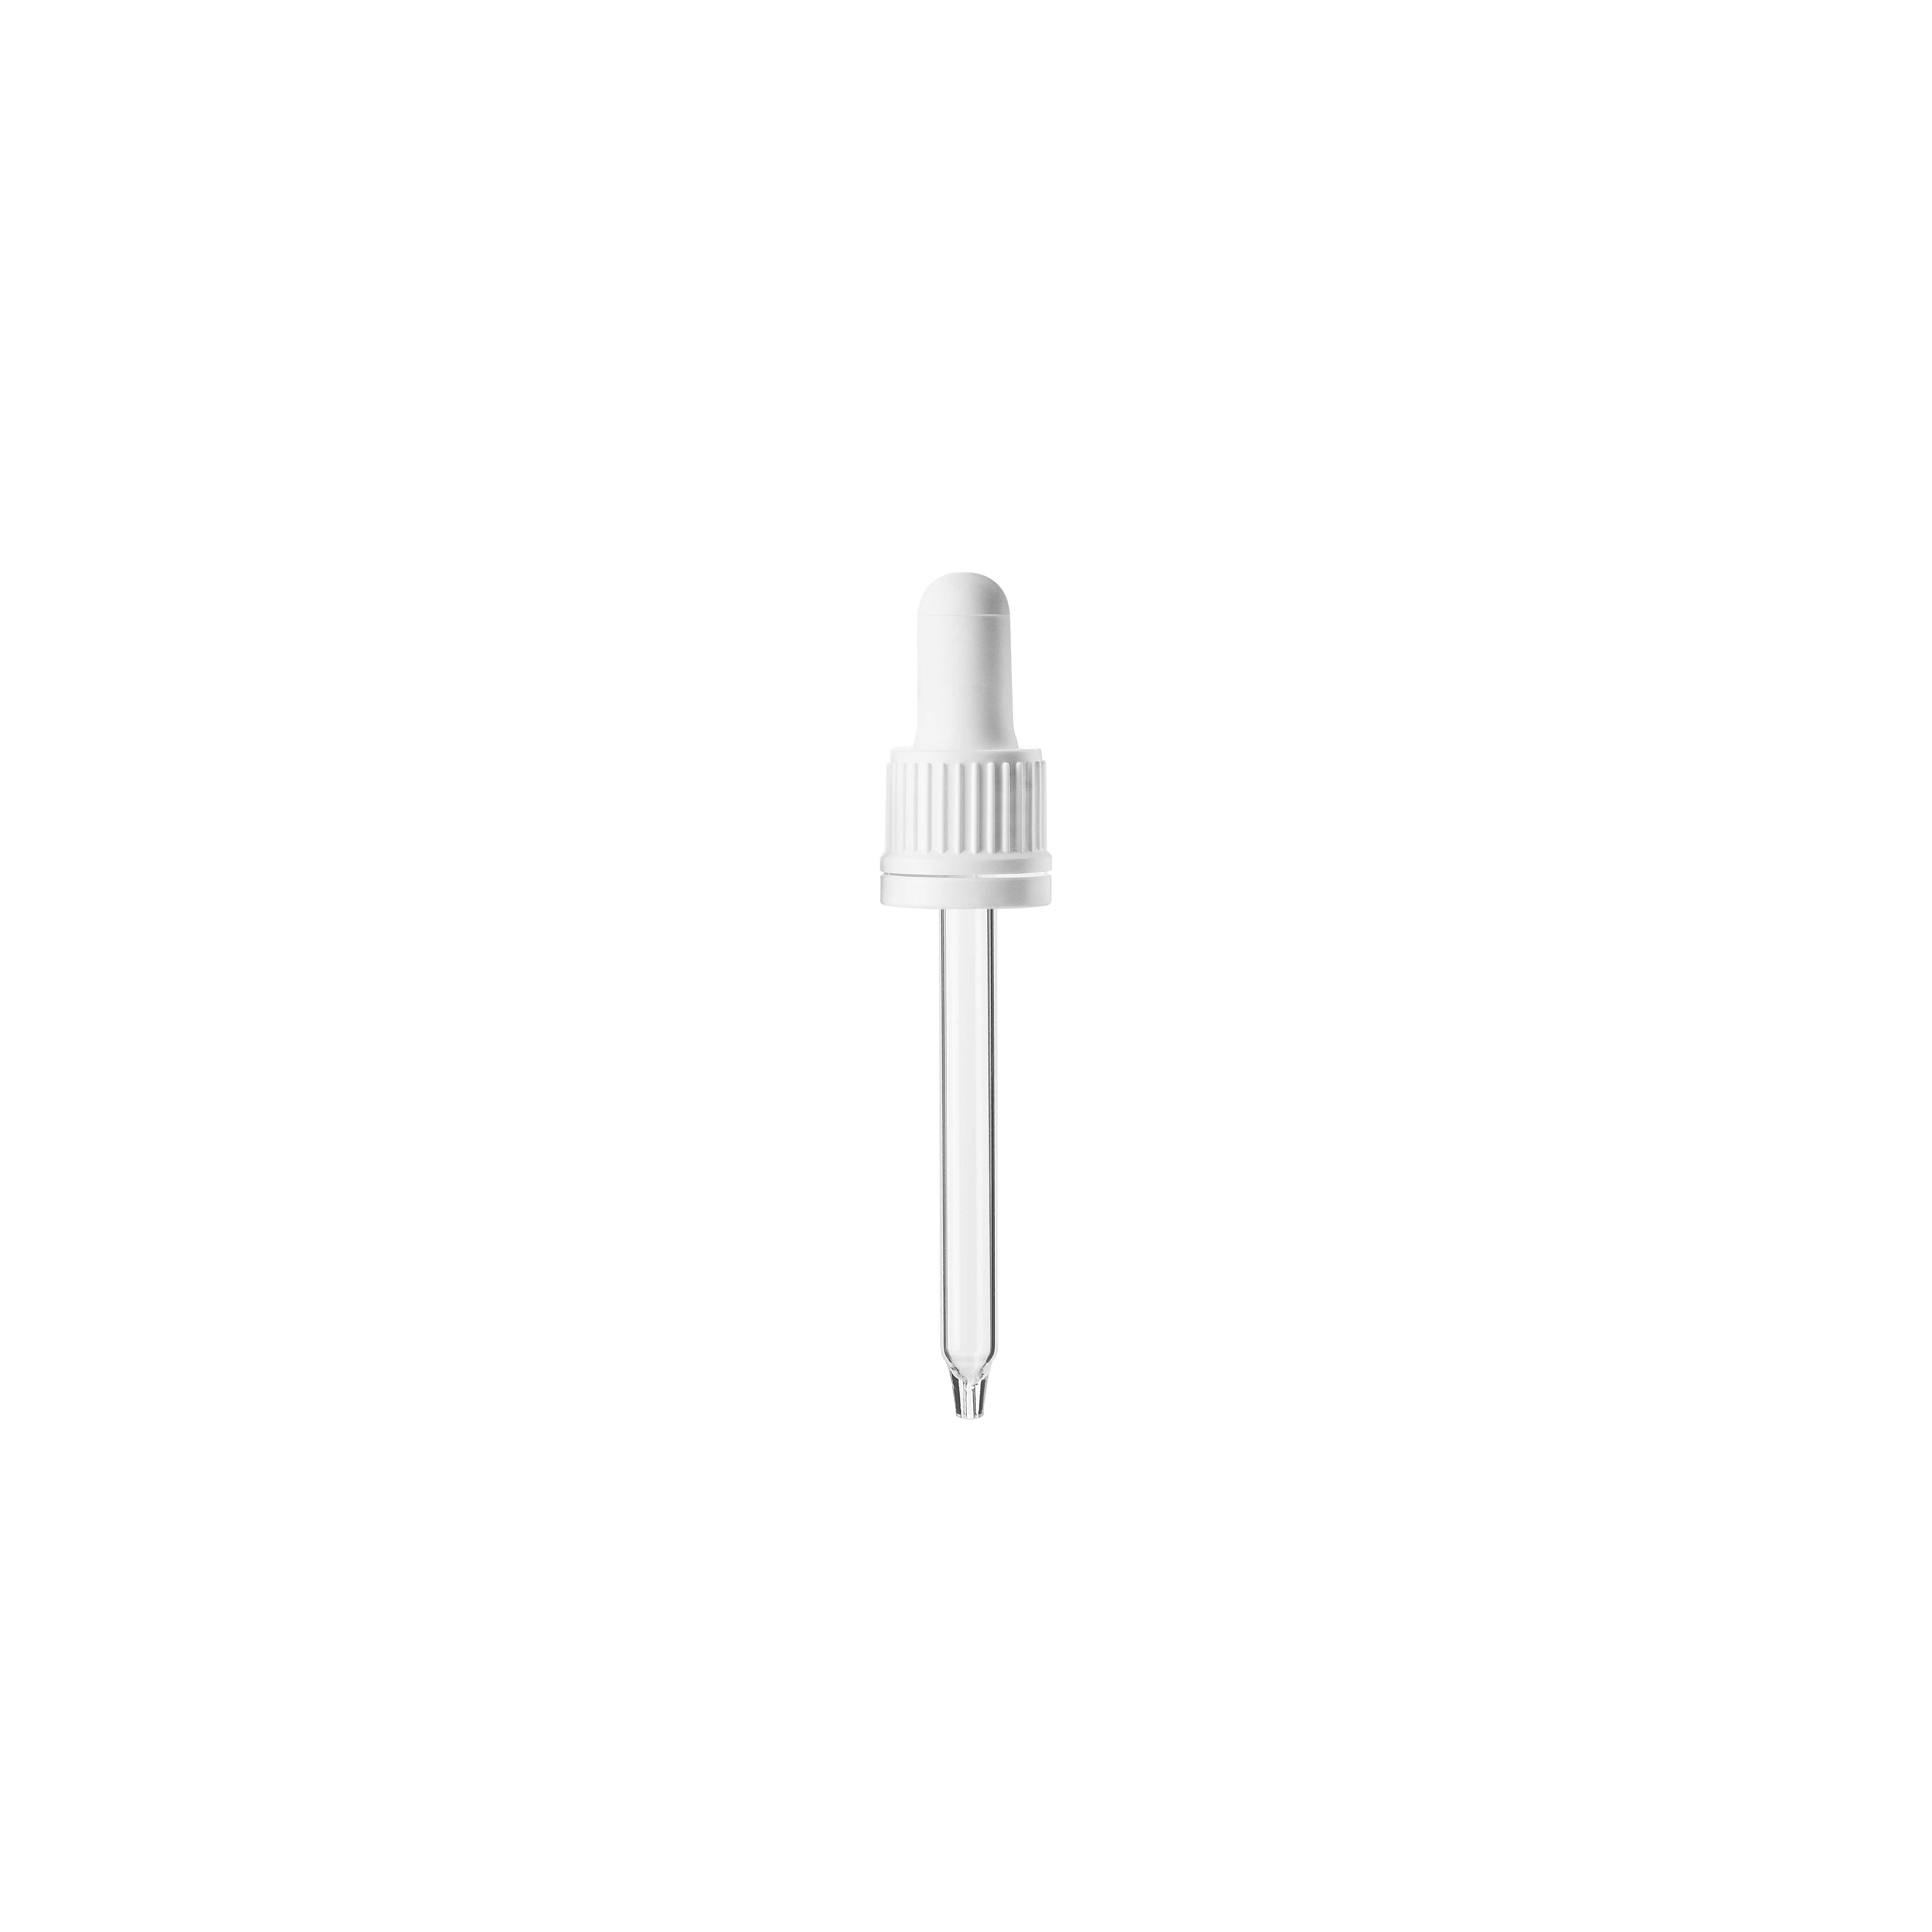 Pipette series II, DIN18, tamper-evident, PP, white, ribbed, white bulb TPE 1.0 ml, conical tip with 1.0 opening for Ginger 50 ml